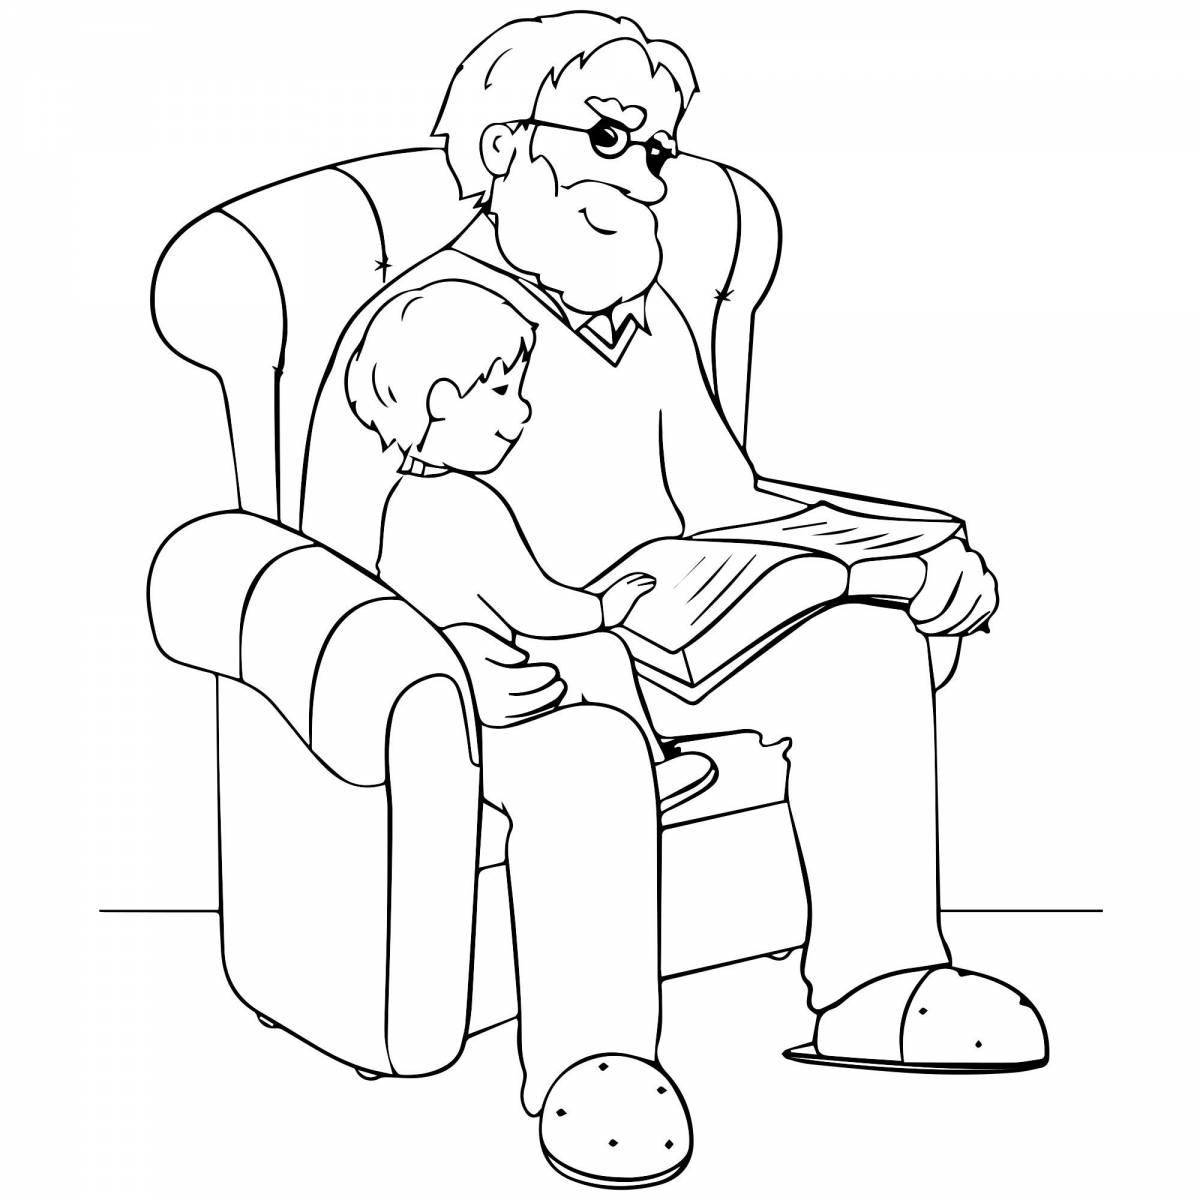 Fun coloring book for grandparents for kids